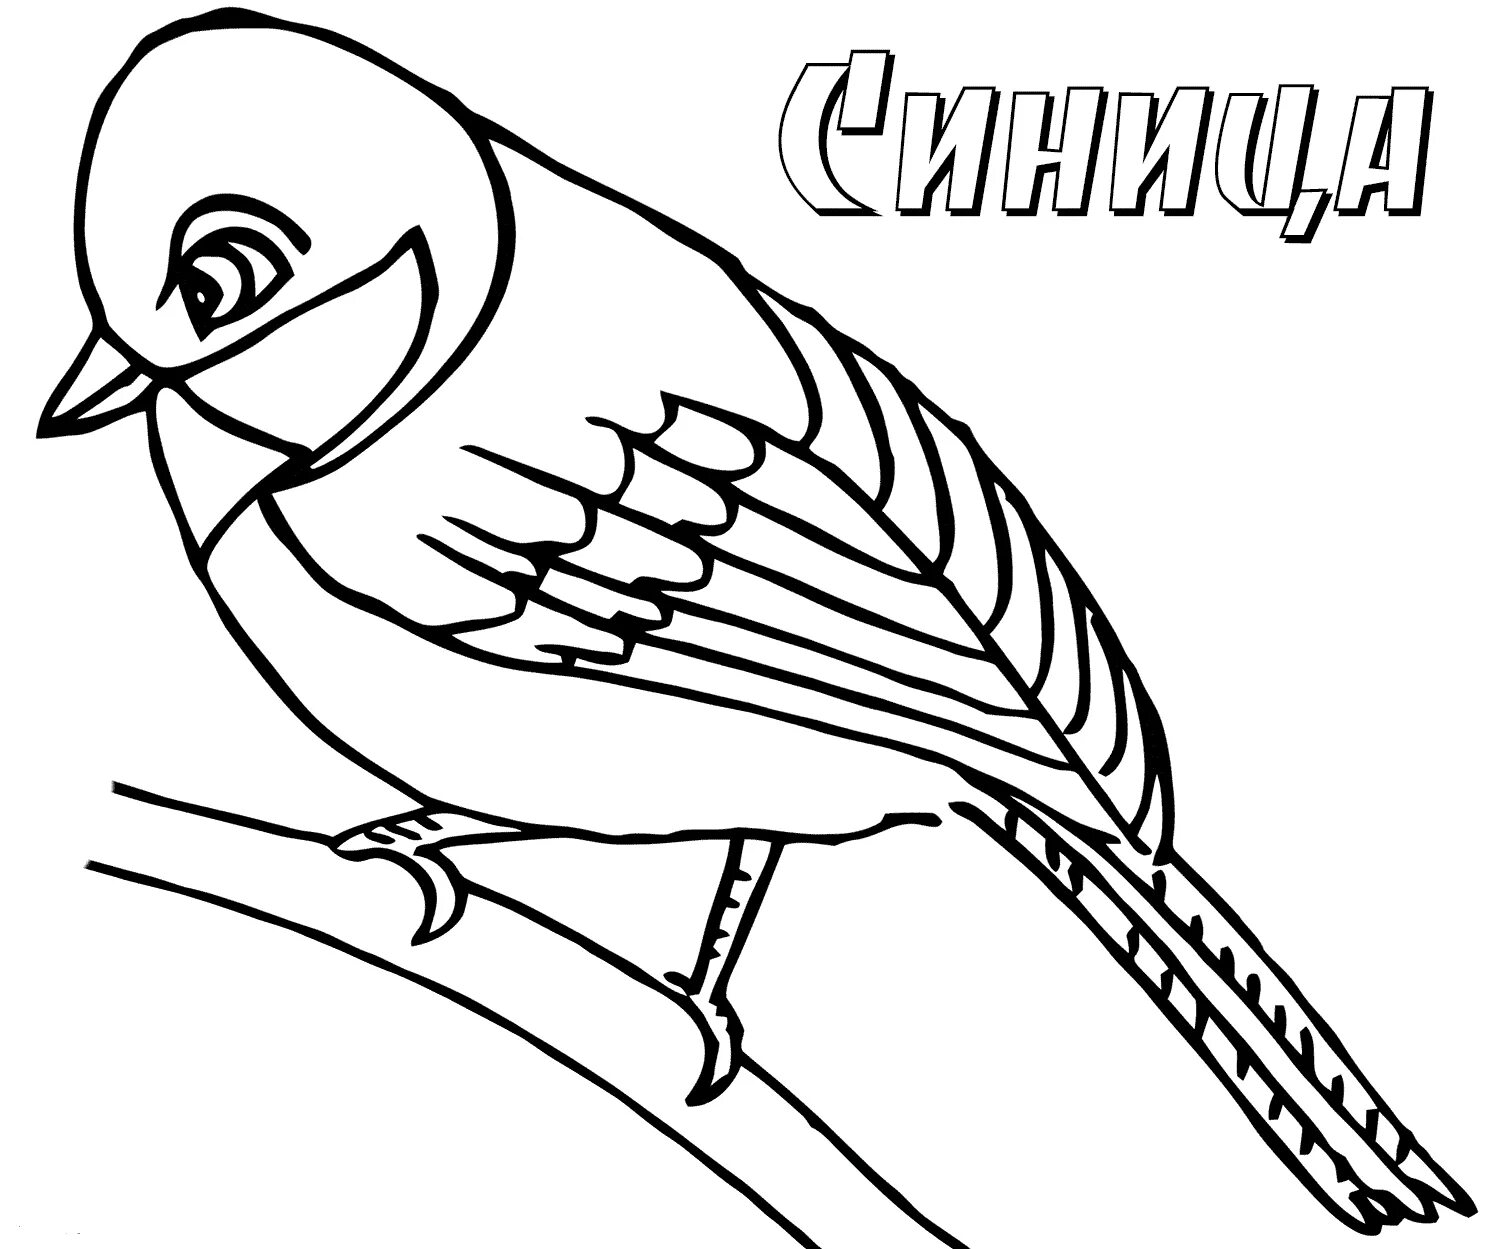 Coloring book funny bird for children 5-6 years old